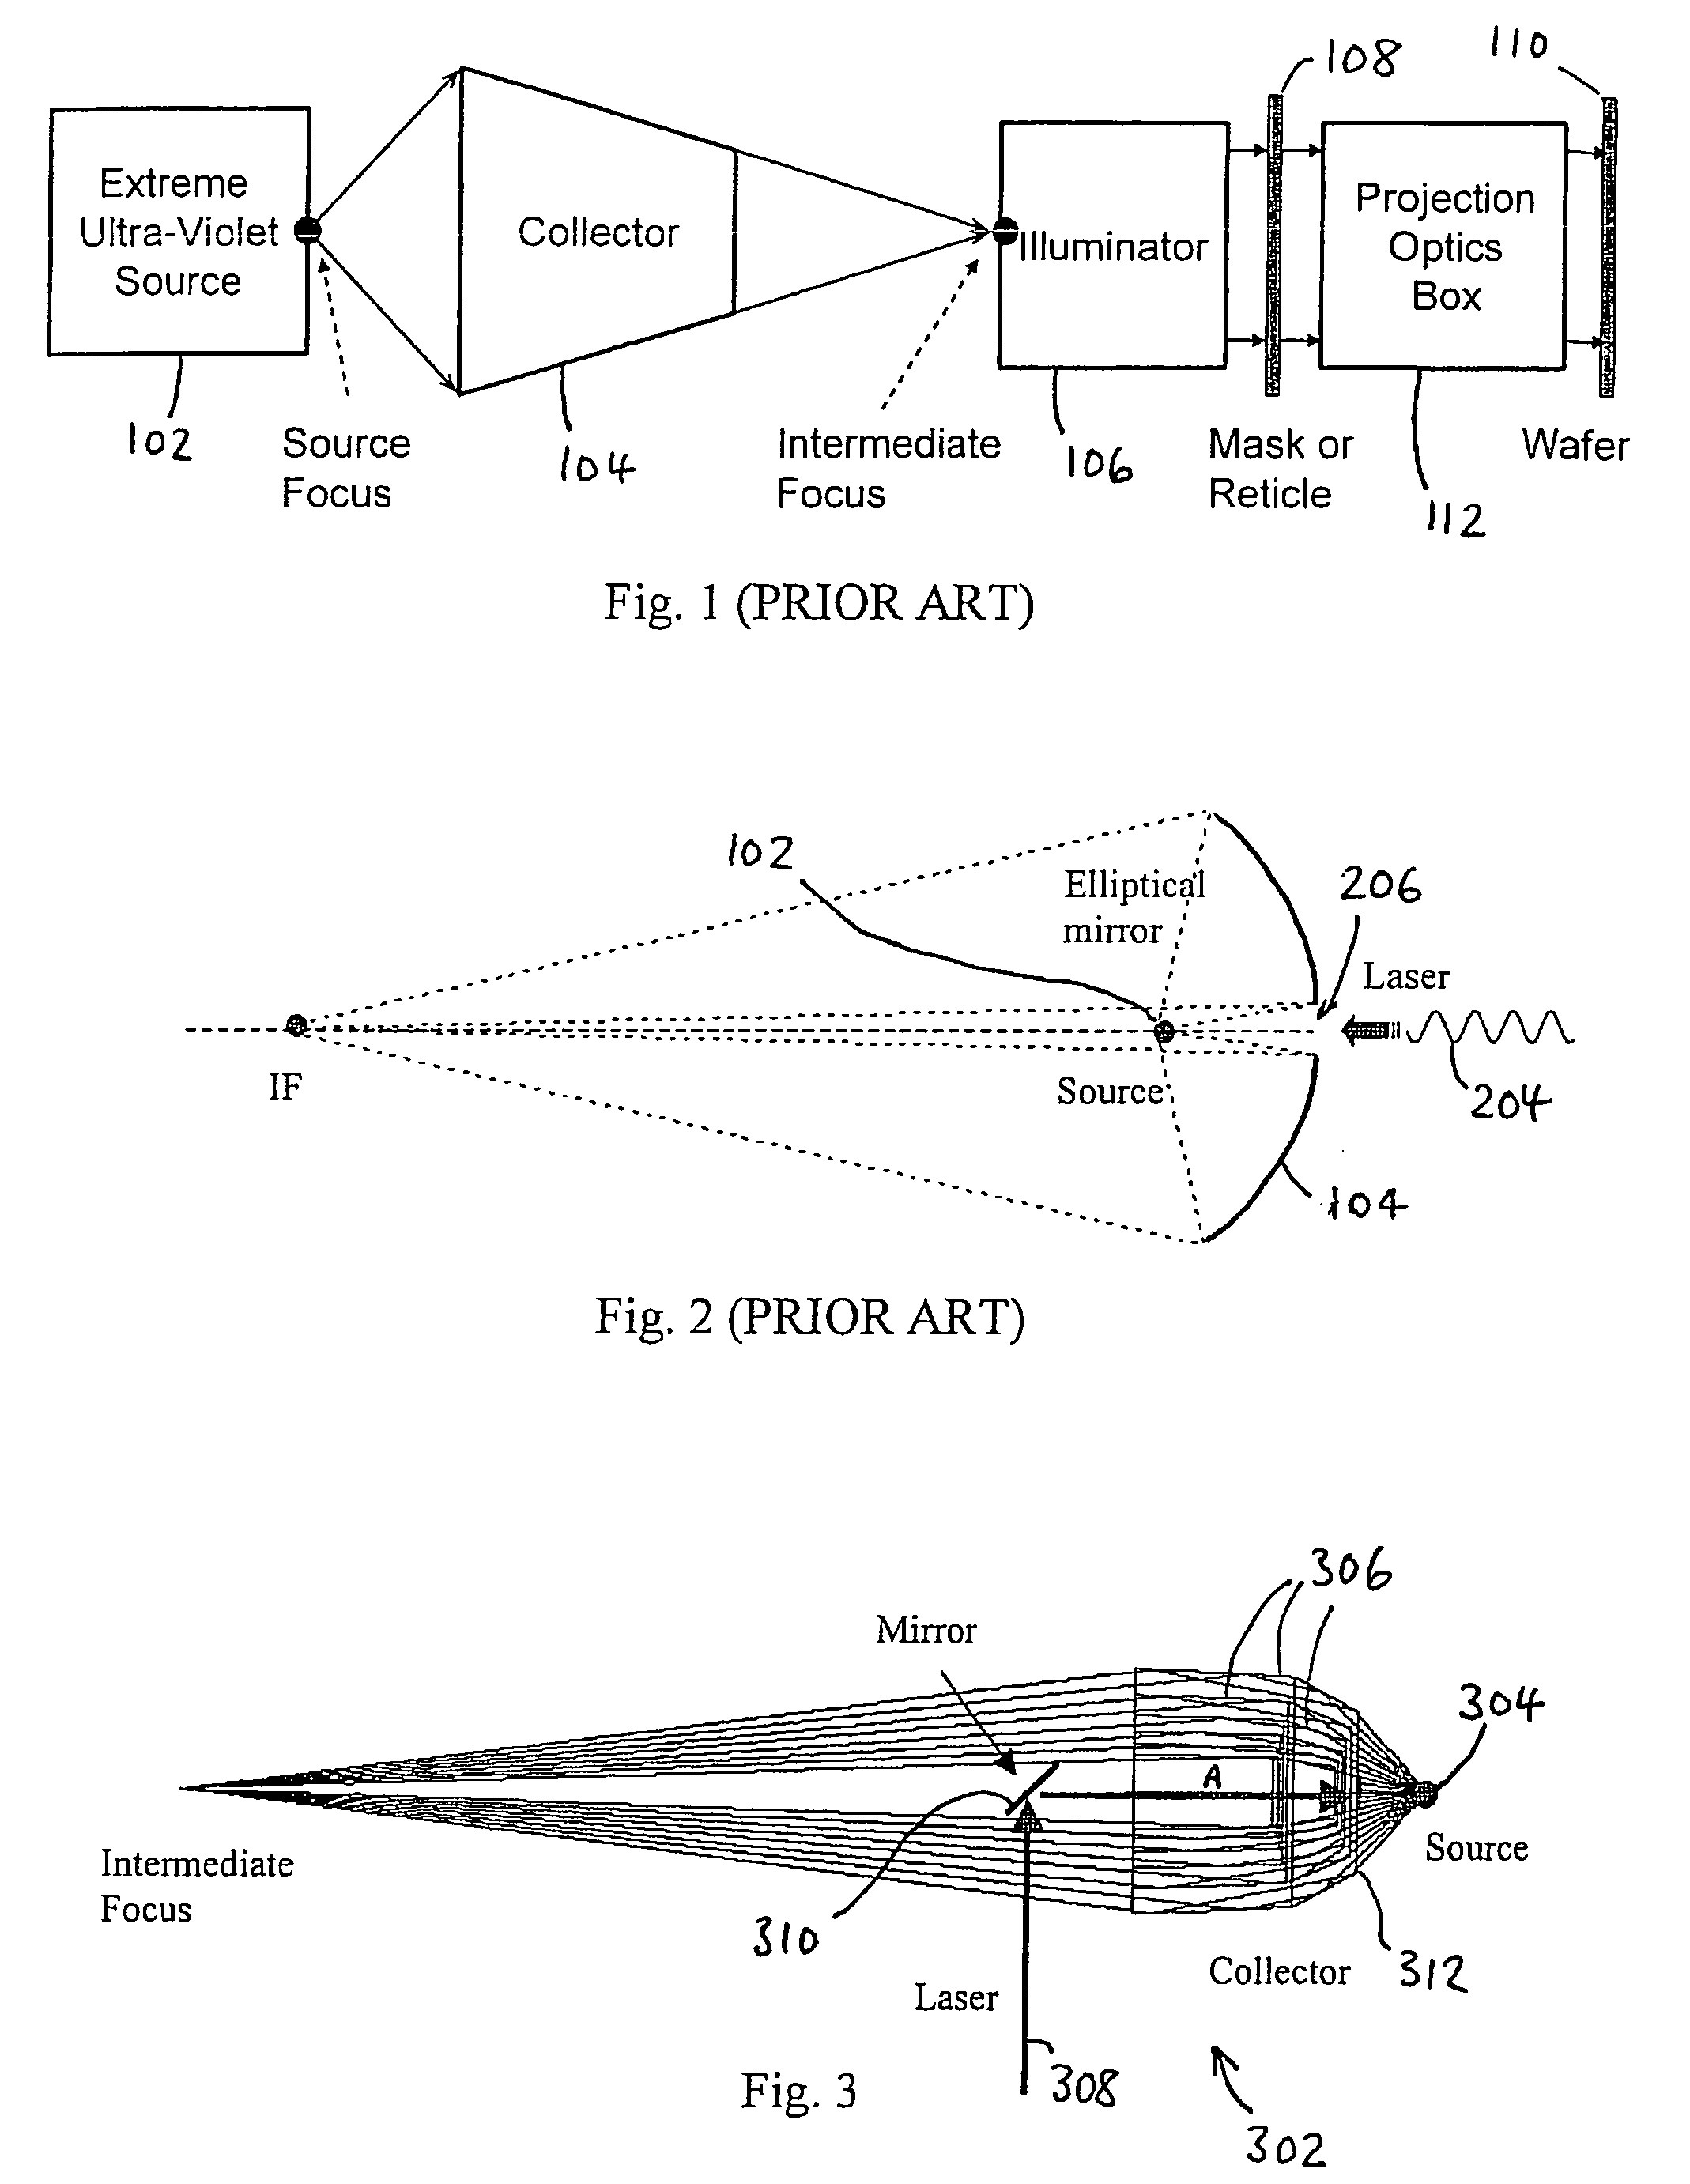 Grazing incidence collector for laser produced plasma sources